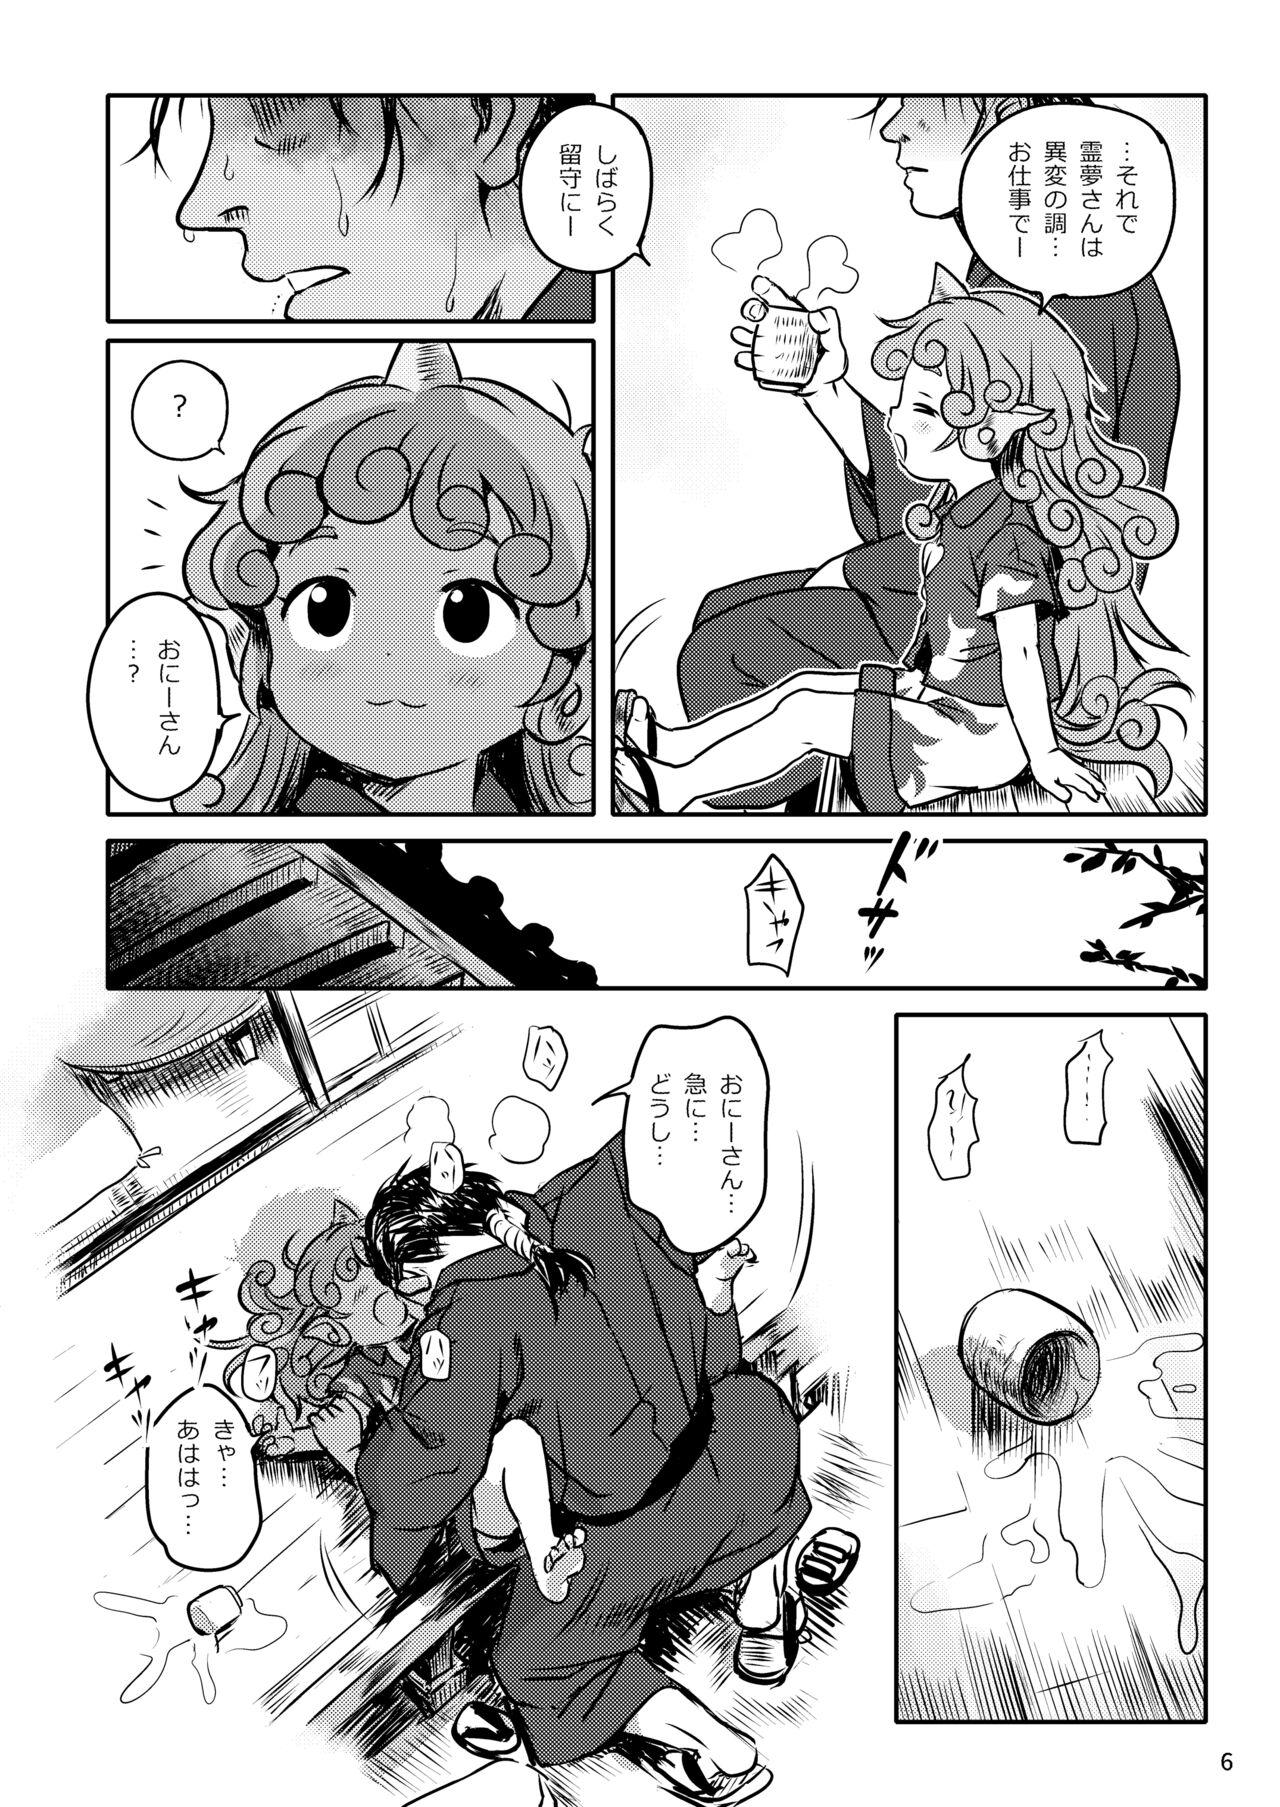 Topless Haratte! Aun-chan! - Touhou project Teenage Sex - Page 6